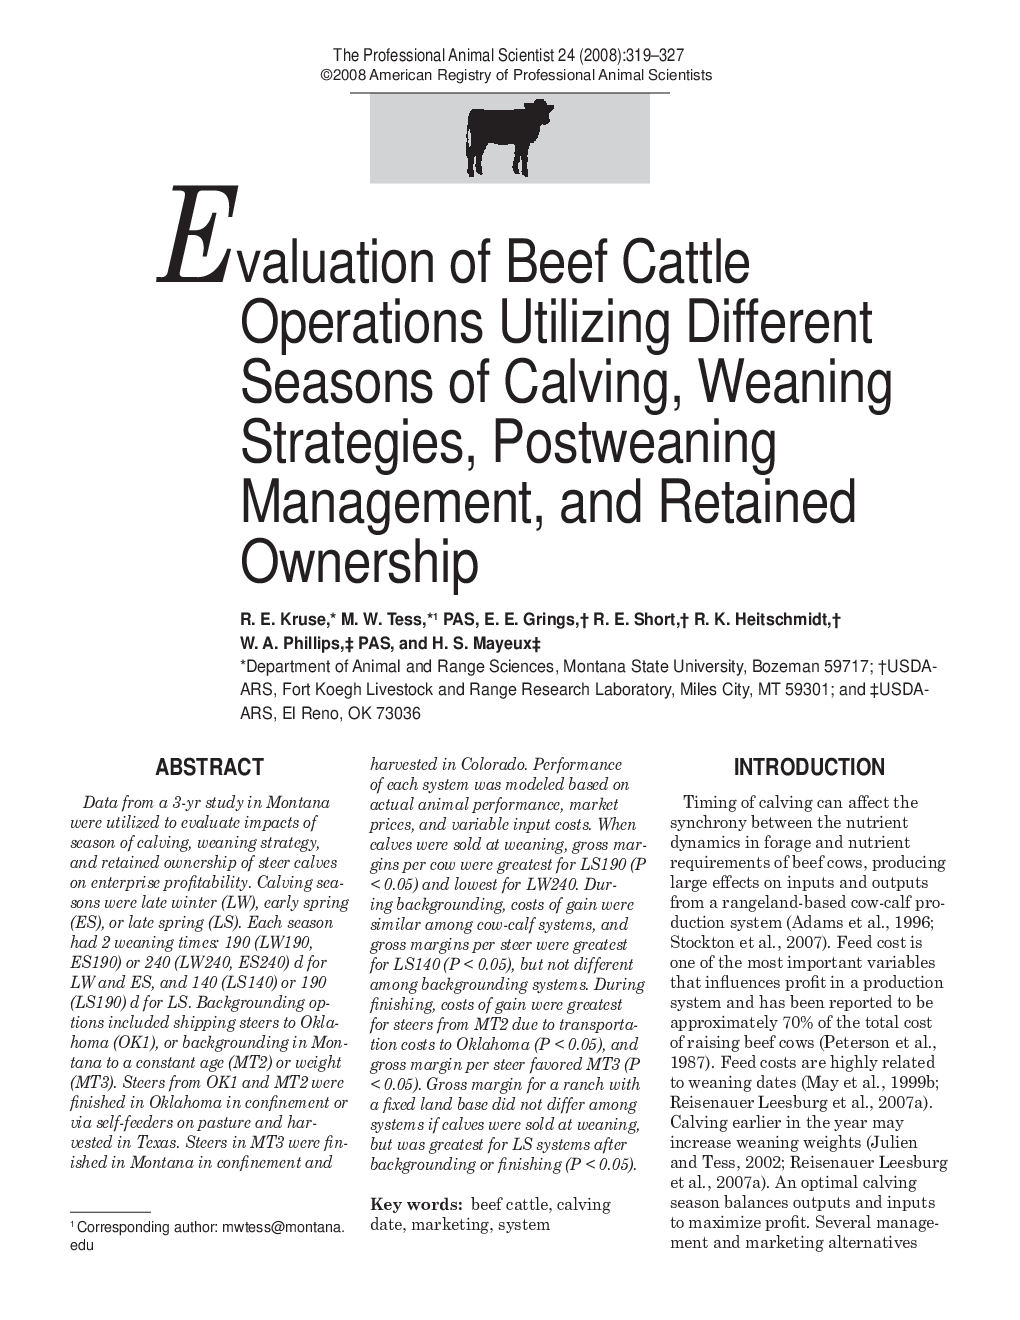 Evaluation of Beef Cattle Operations Utilizing Different Seasons of Calving, Weaning Strategies, Postweaning Management, and Retained Ownership